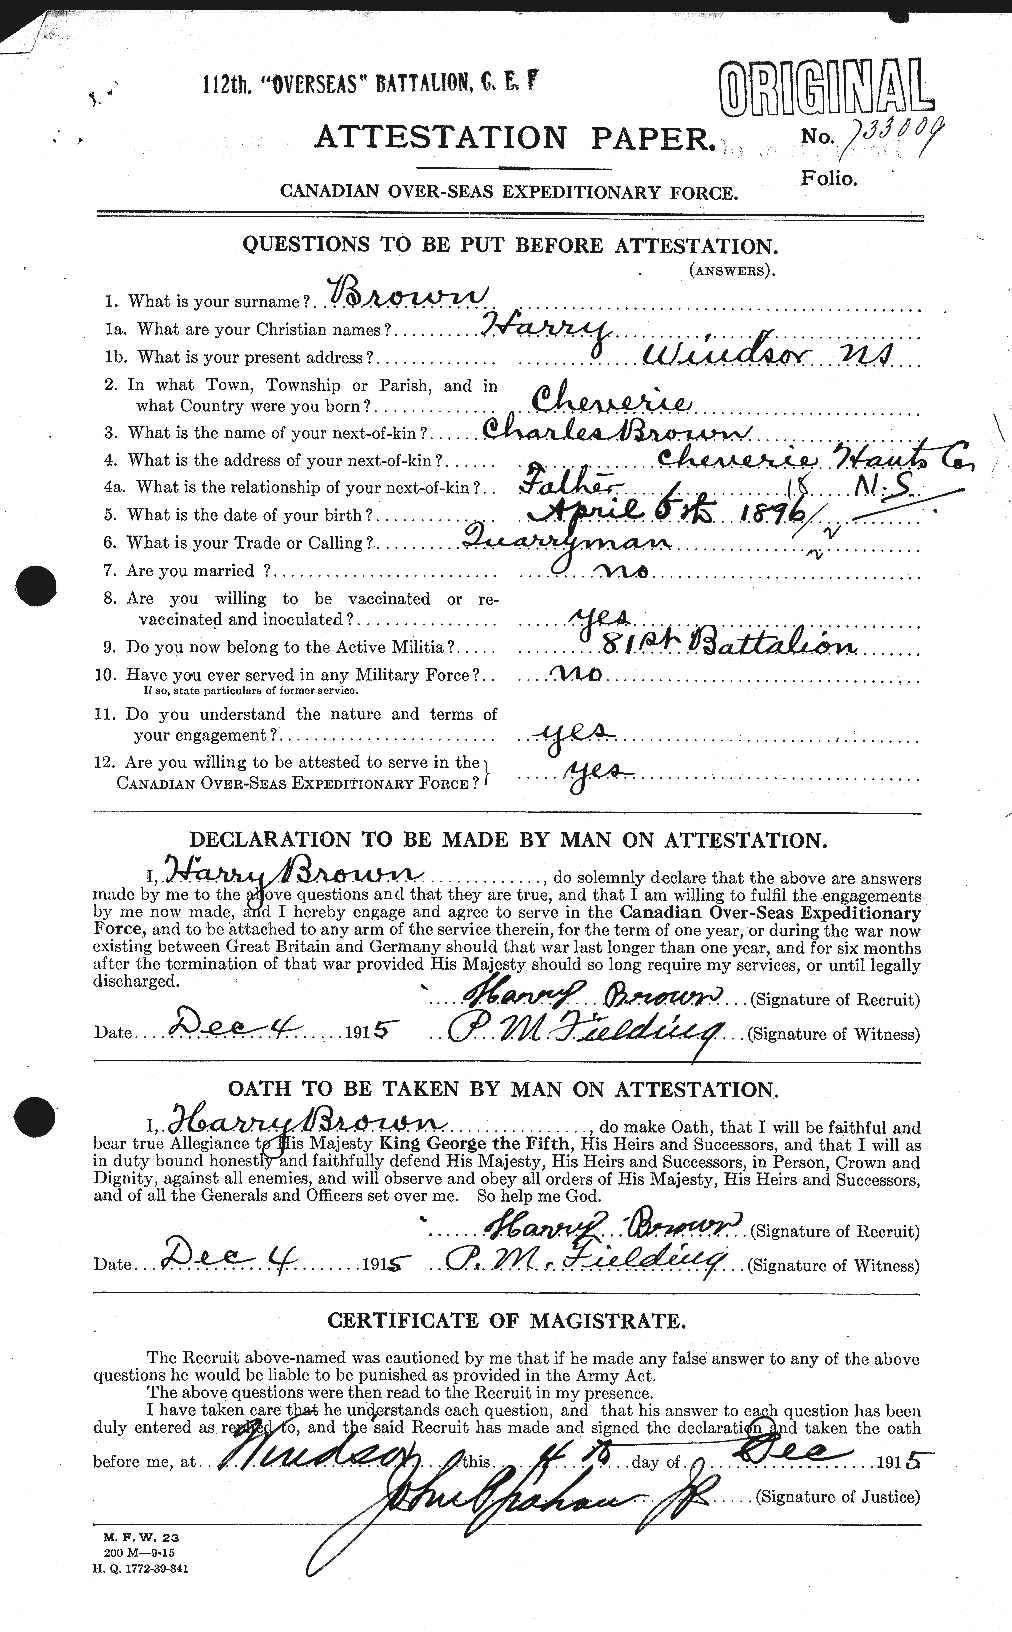 Personnel Records of the First World War - CEF 265384a